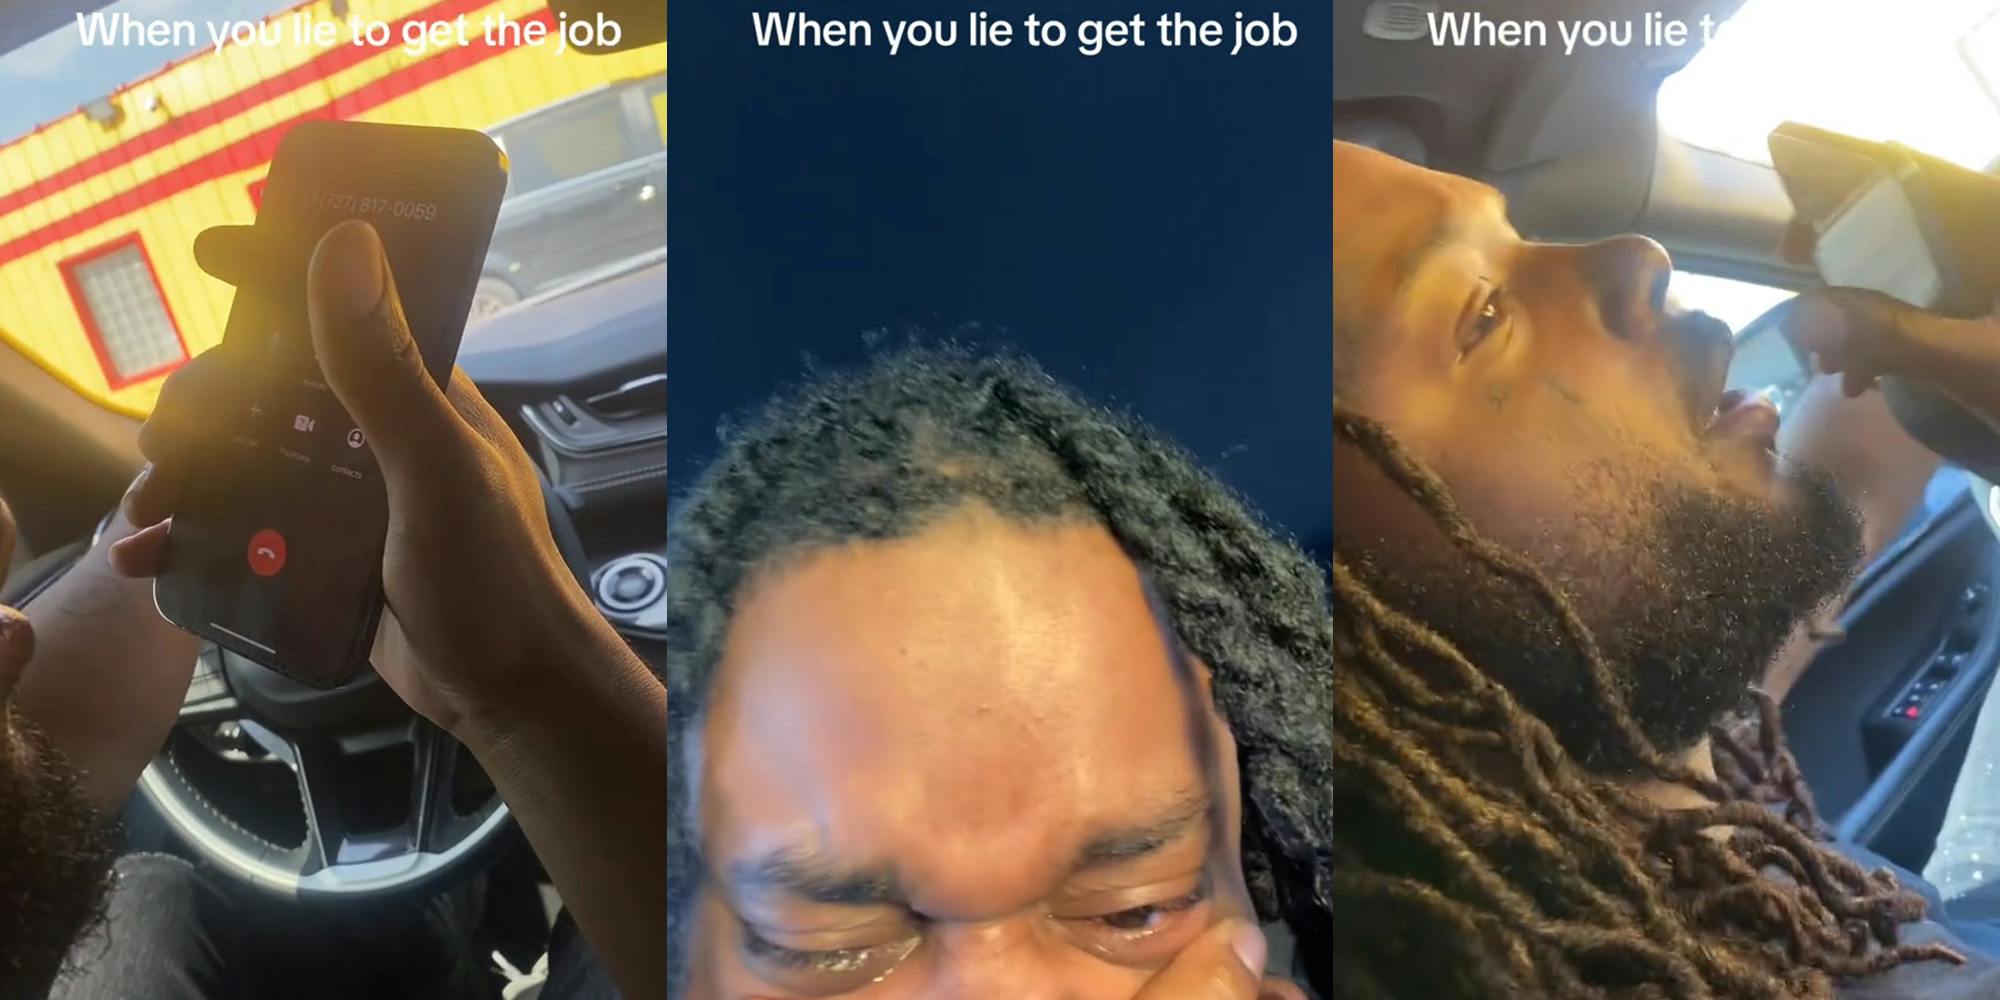 job hunter speaking on the phone in car with caption "When you lie to get the job" (l) job hunter friend in car laughing with caption "When you lie to get the job" (c) job hunter speaking on the phone in car with caption "When you lie to get the job" (r)